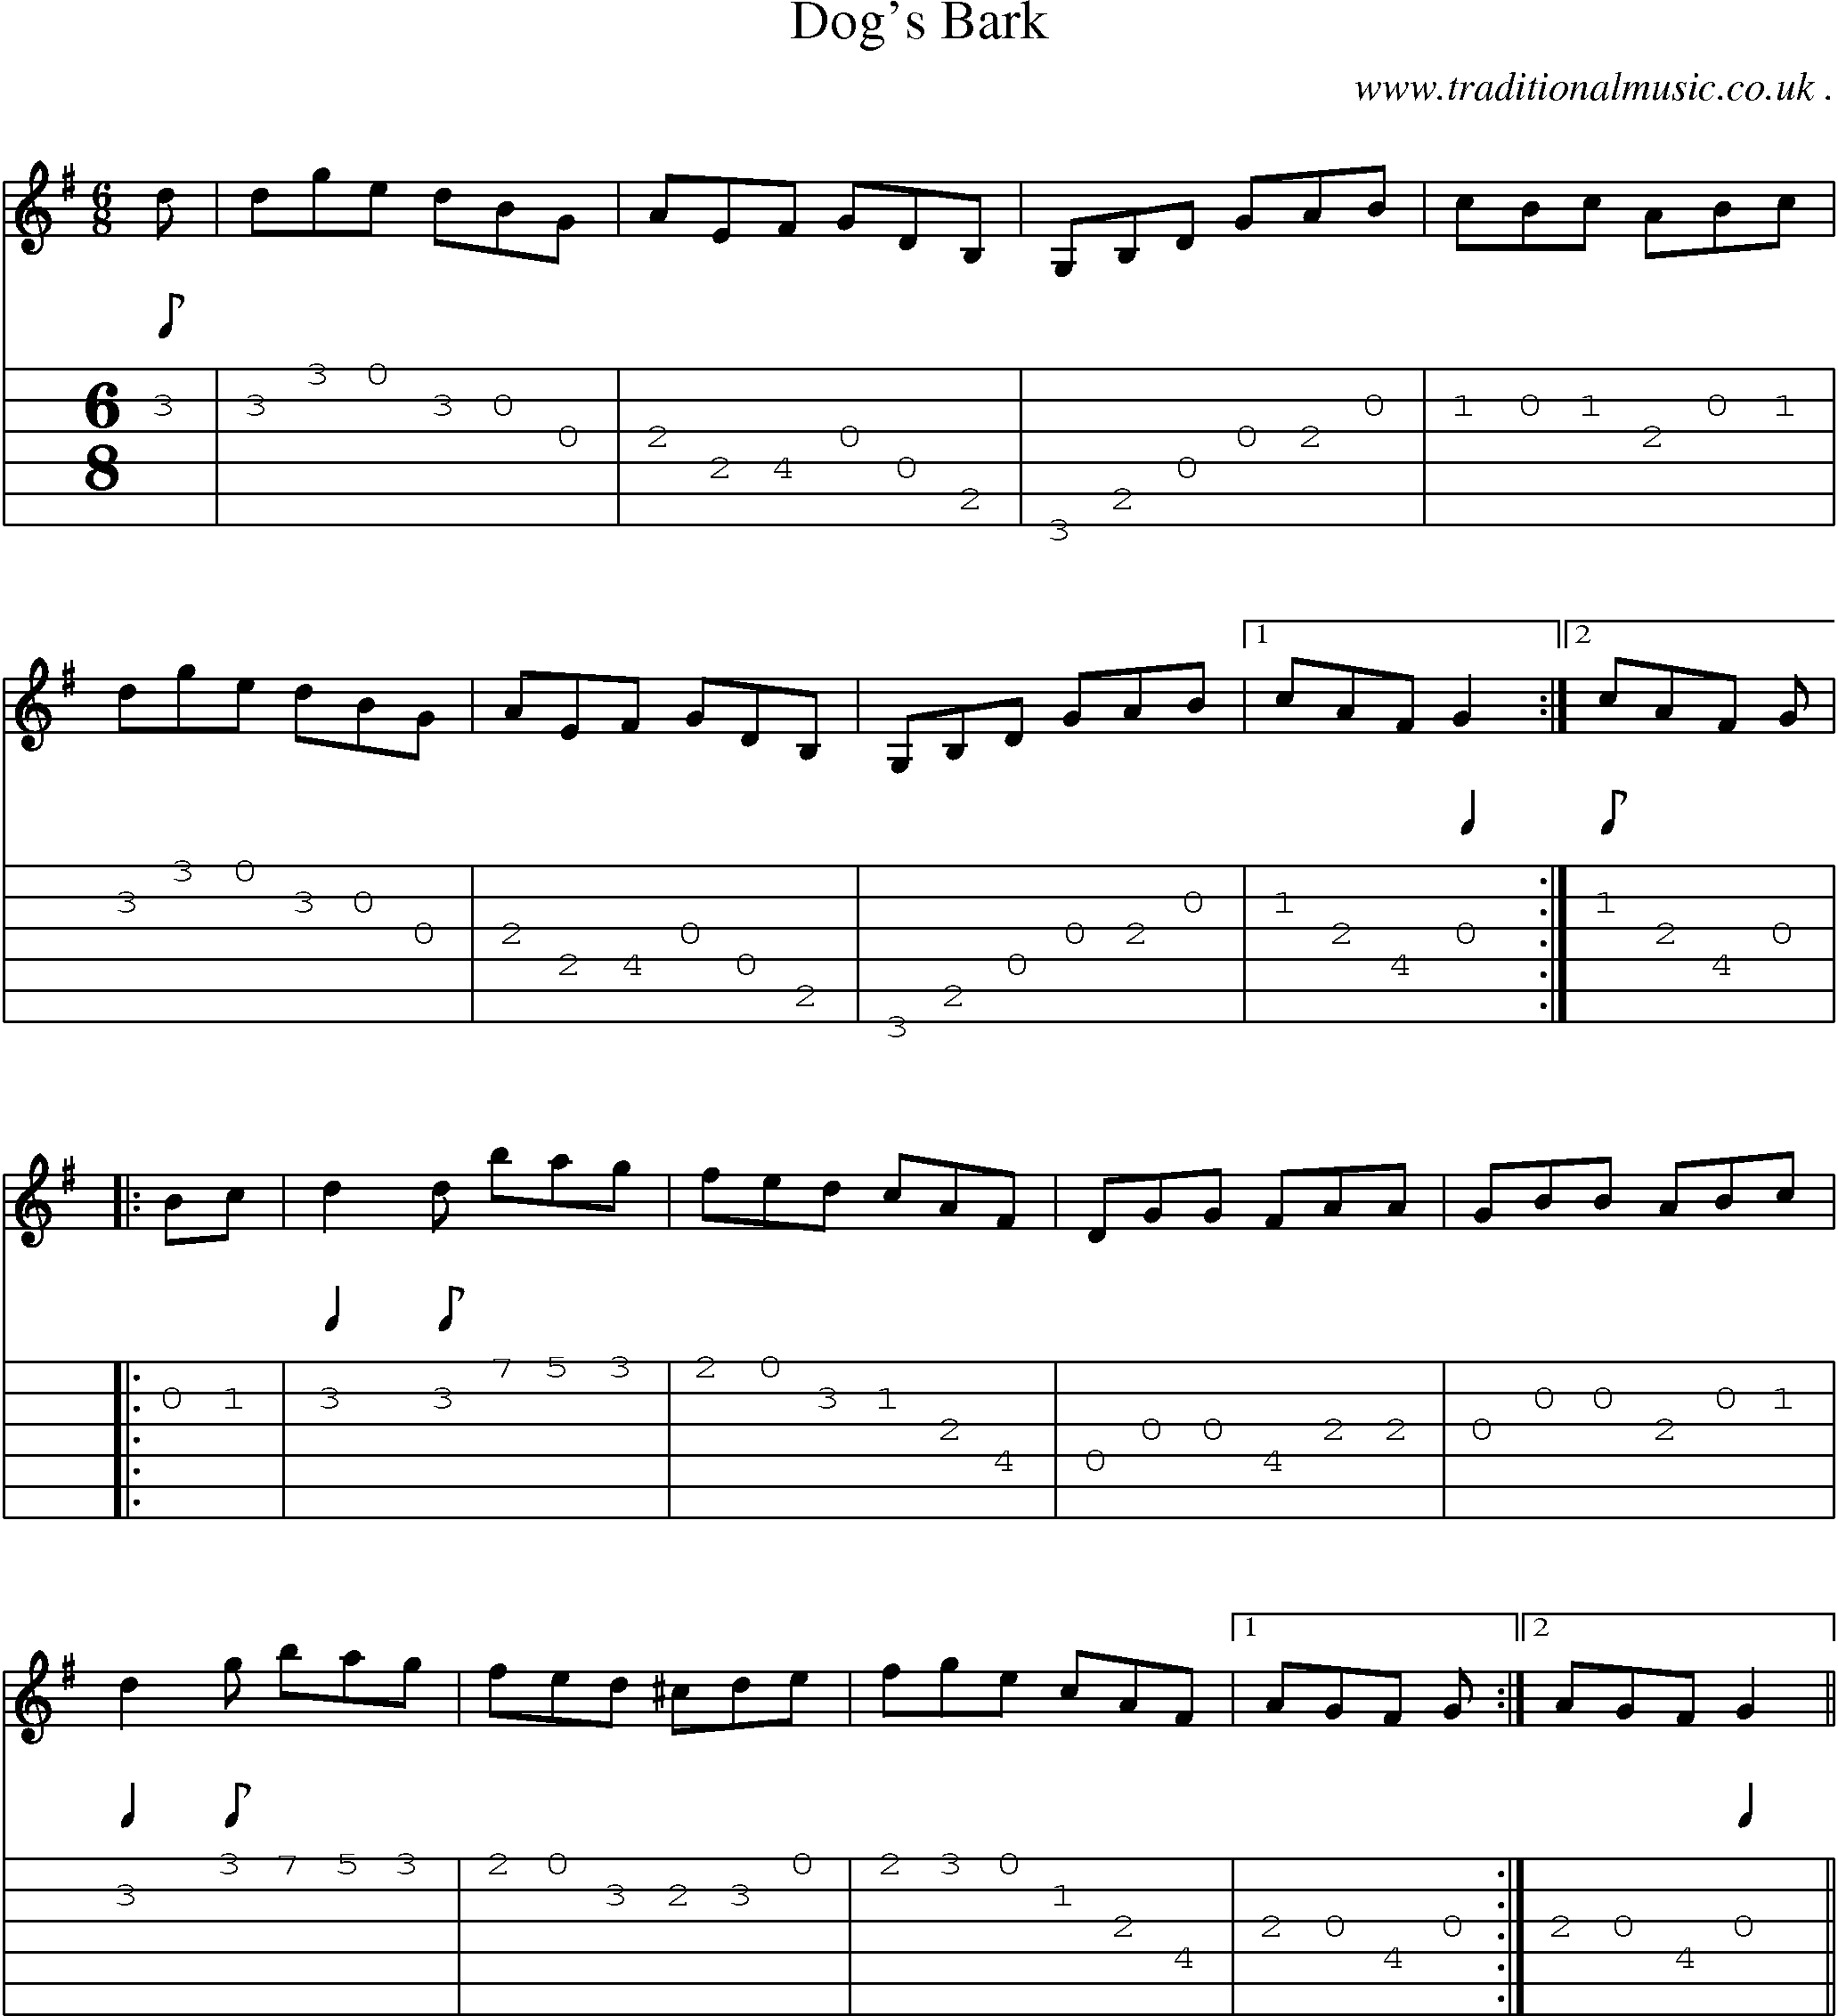 Sheet-Music and Guitar Tabs for Dogs Bark